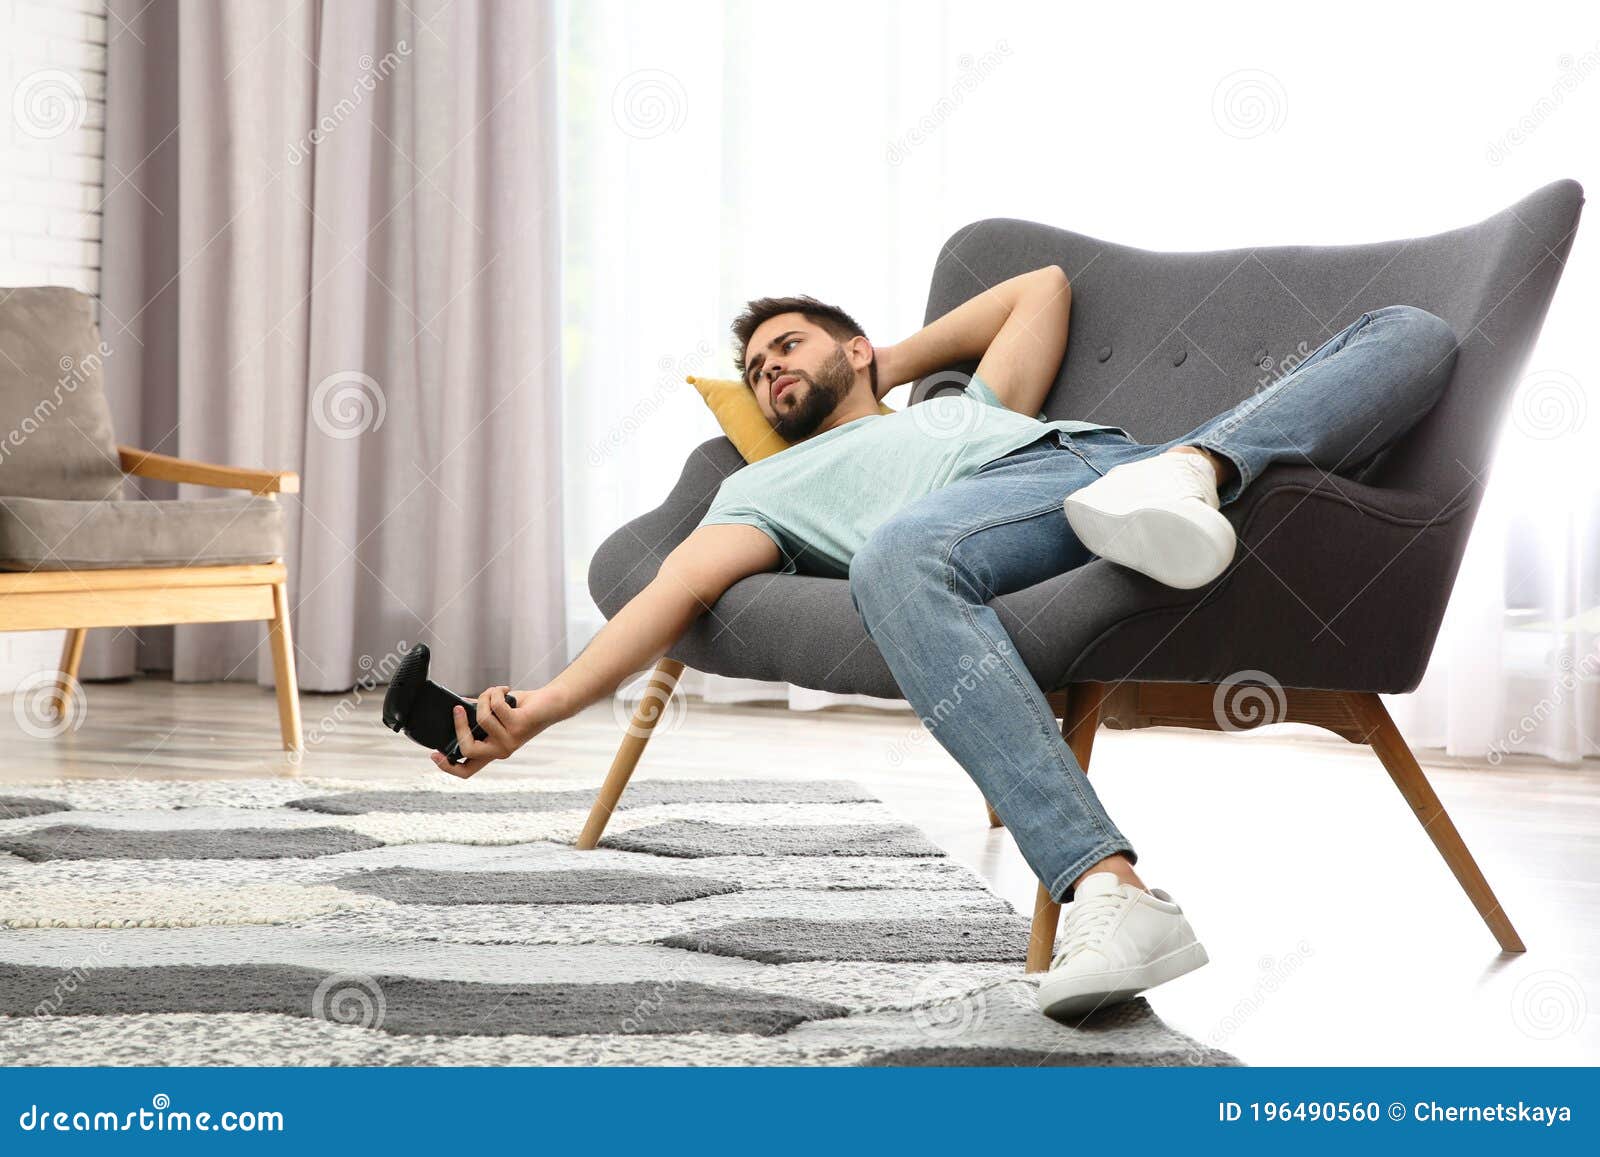 lazy man playing video game while lying on sofa at home